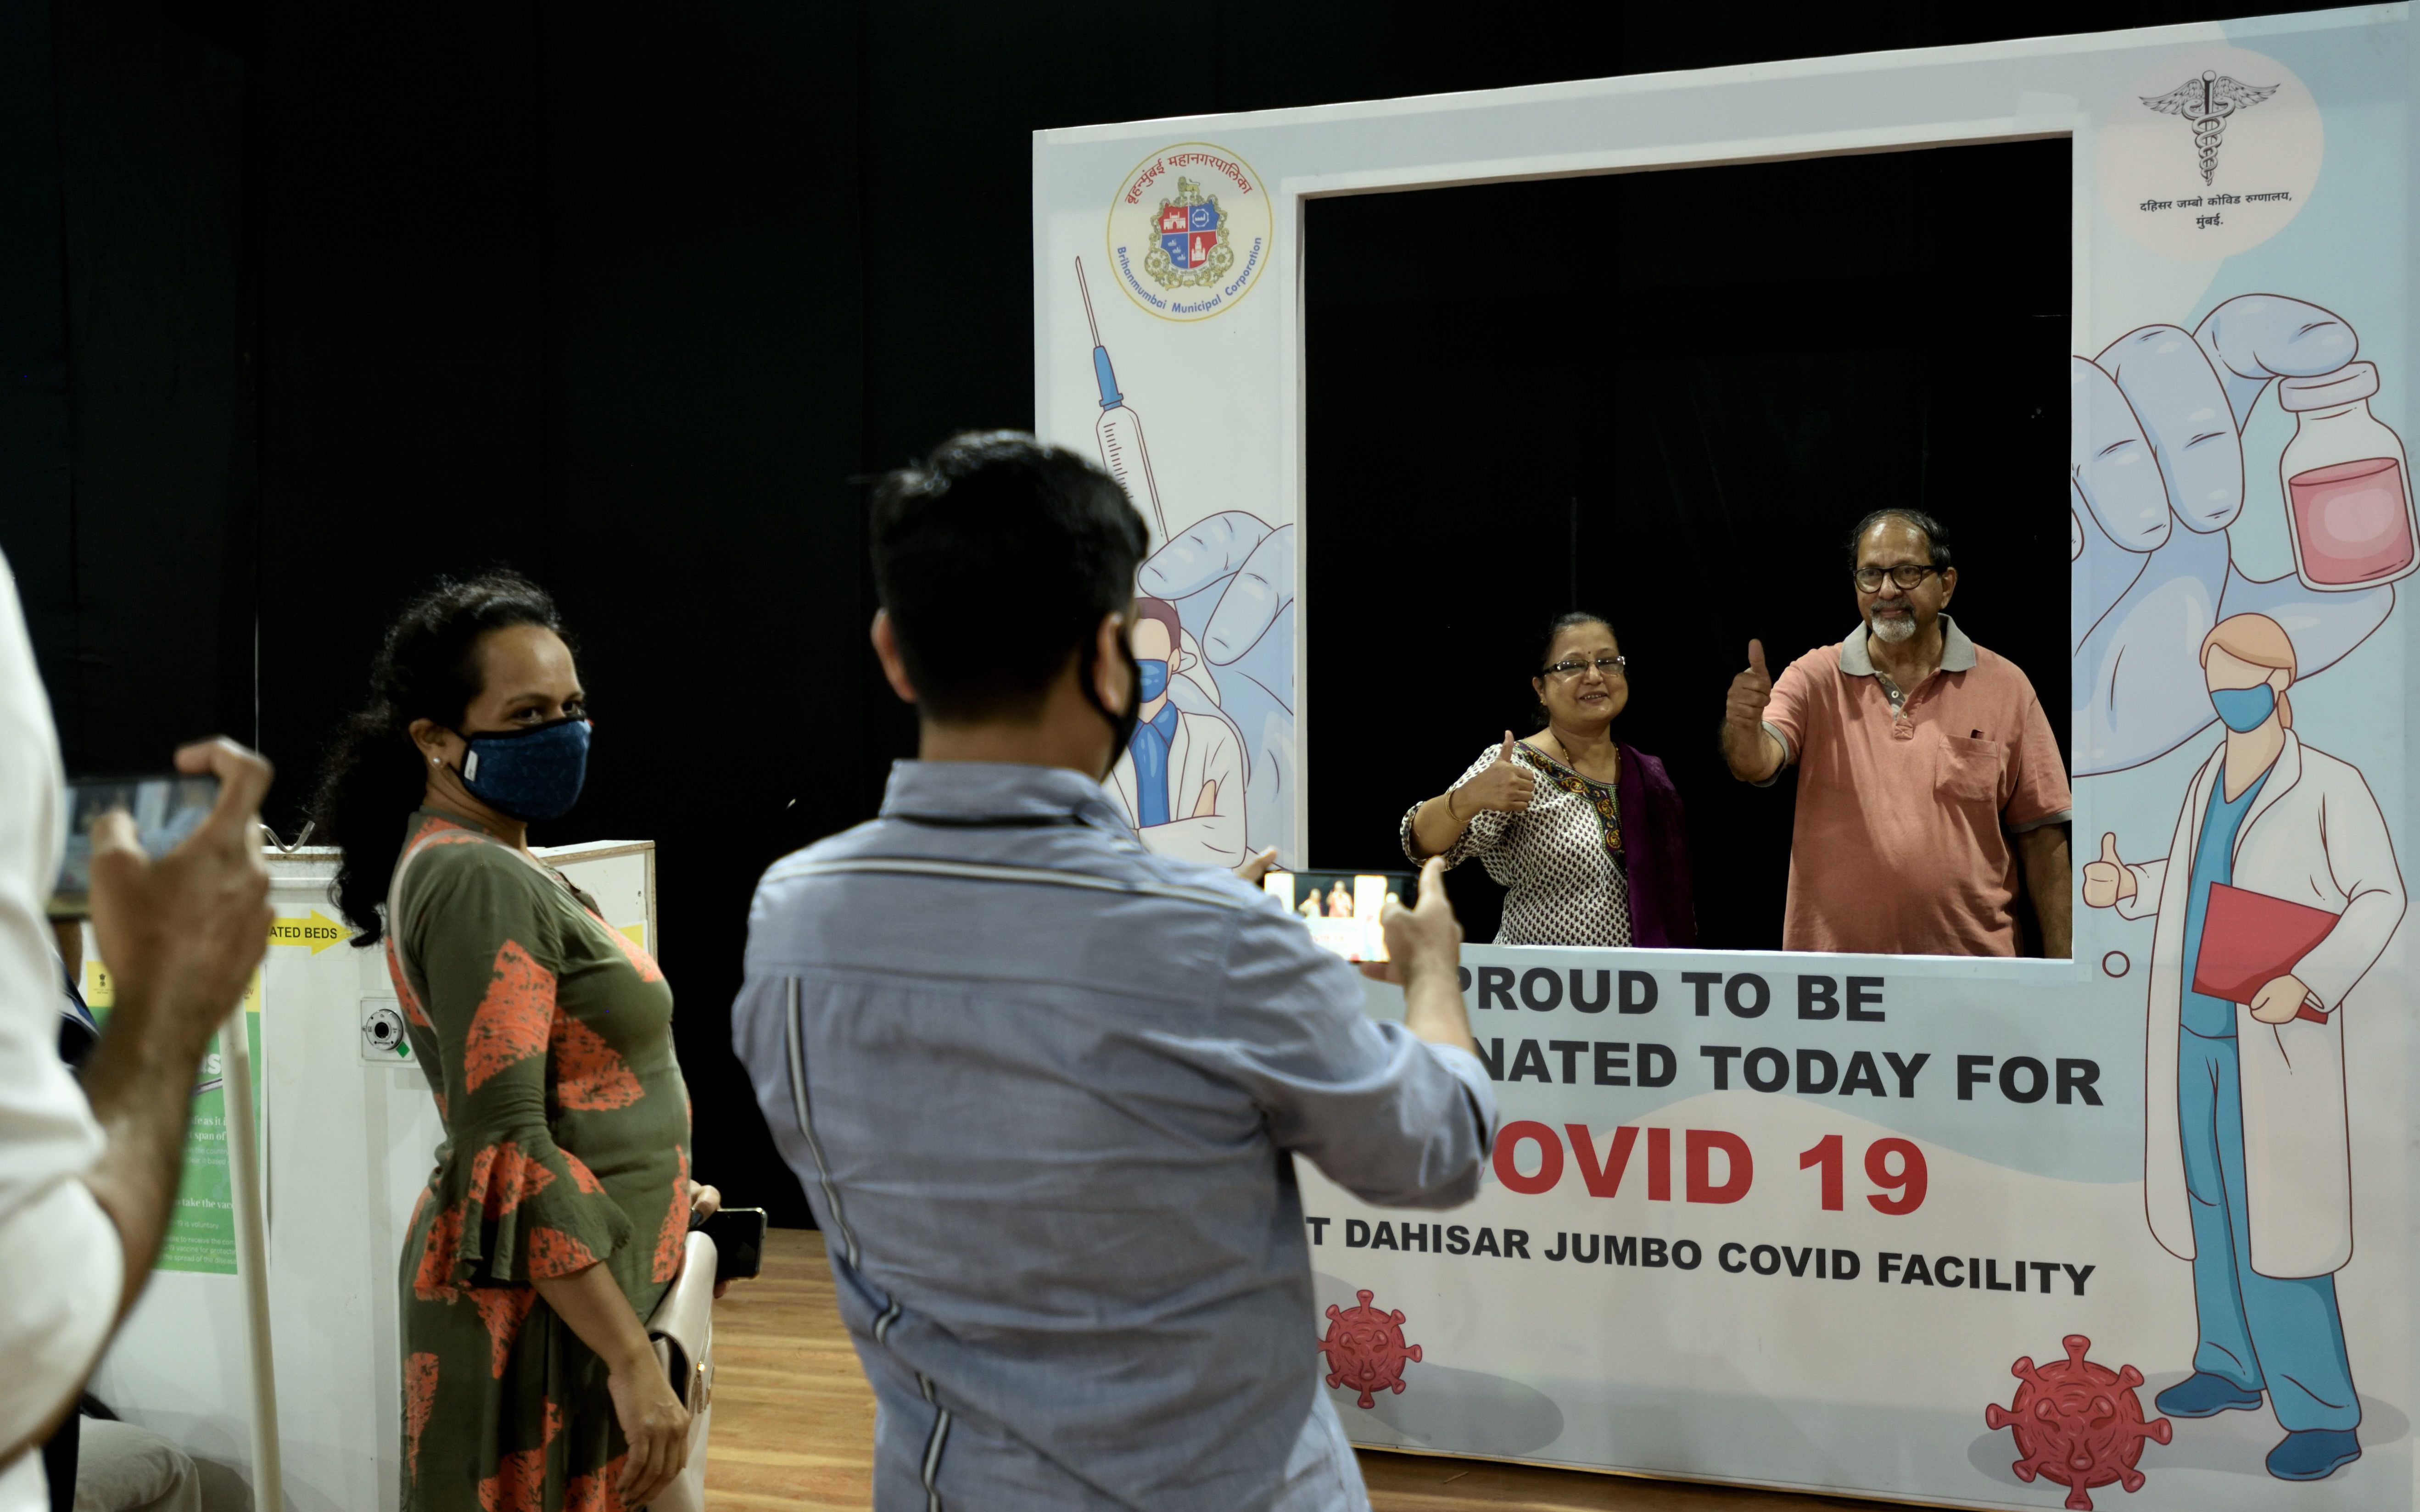  Senior citizens get photographed after being vaccinated against Covid-19 at Dahisar vaccine center on March 9, 2021 in Mumbai, India.